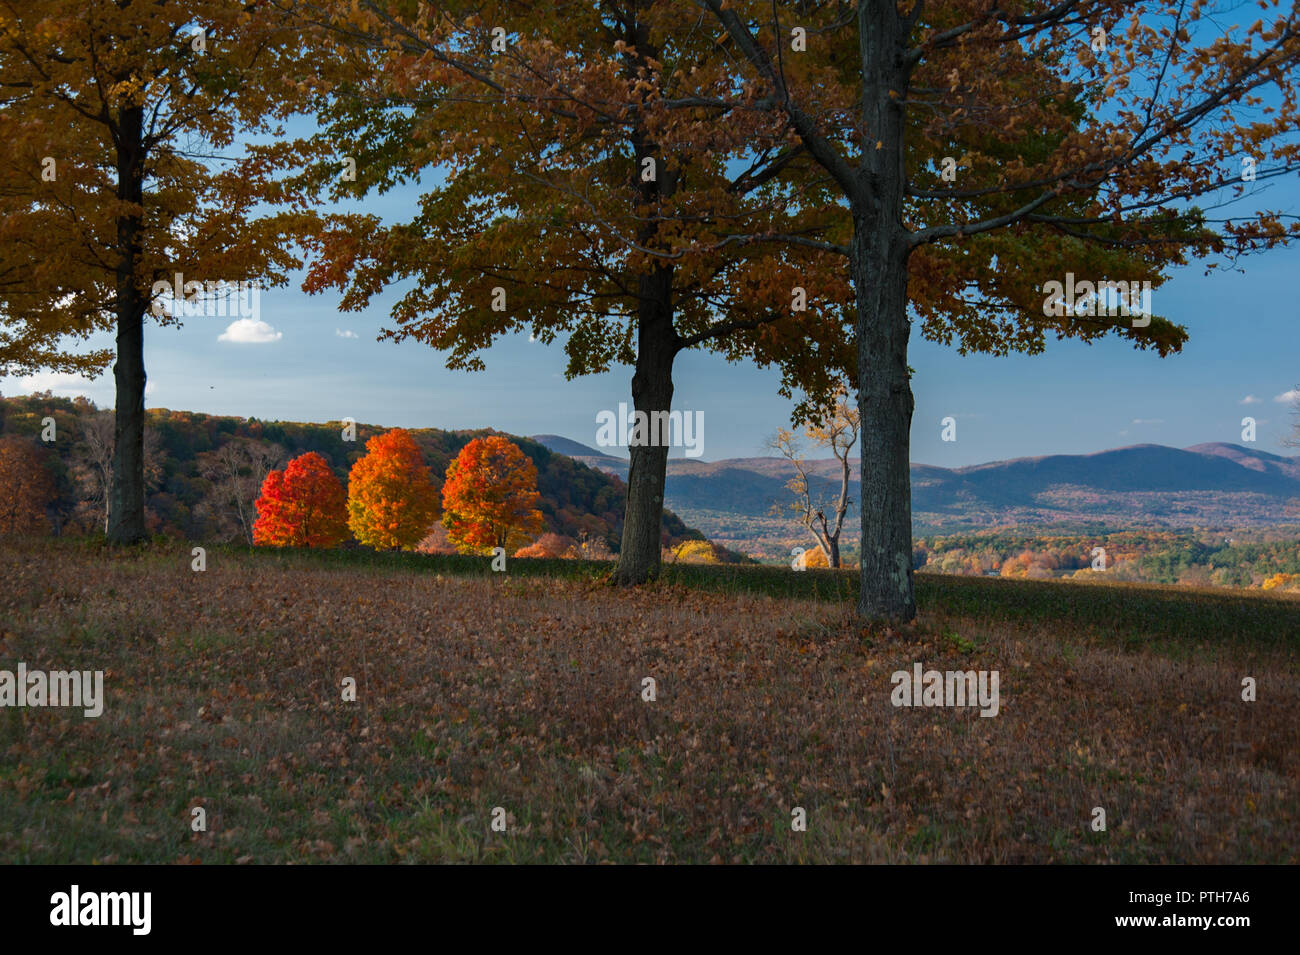 Fall color in Berkshire Hills, western Mass., with evening sun lighting three trees and distant landscape with vivid color Stock Photo